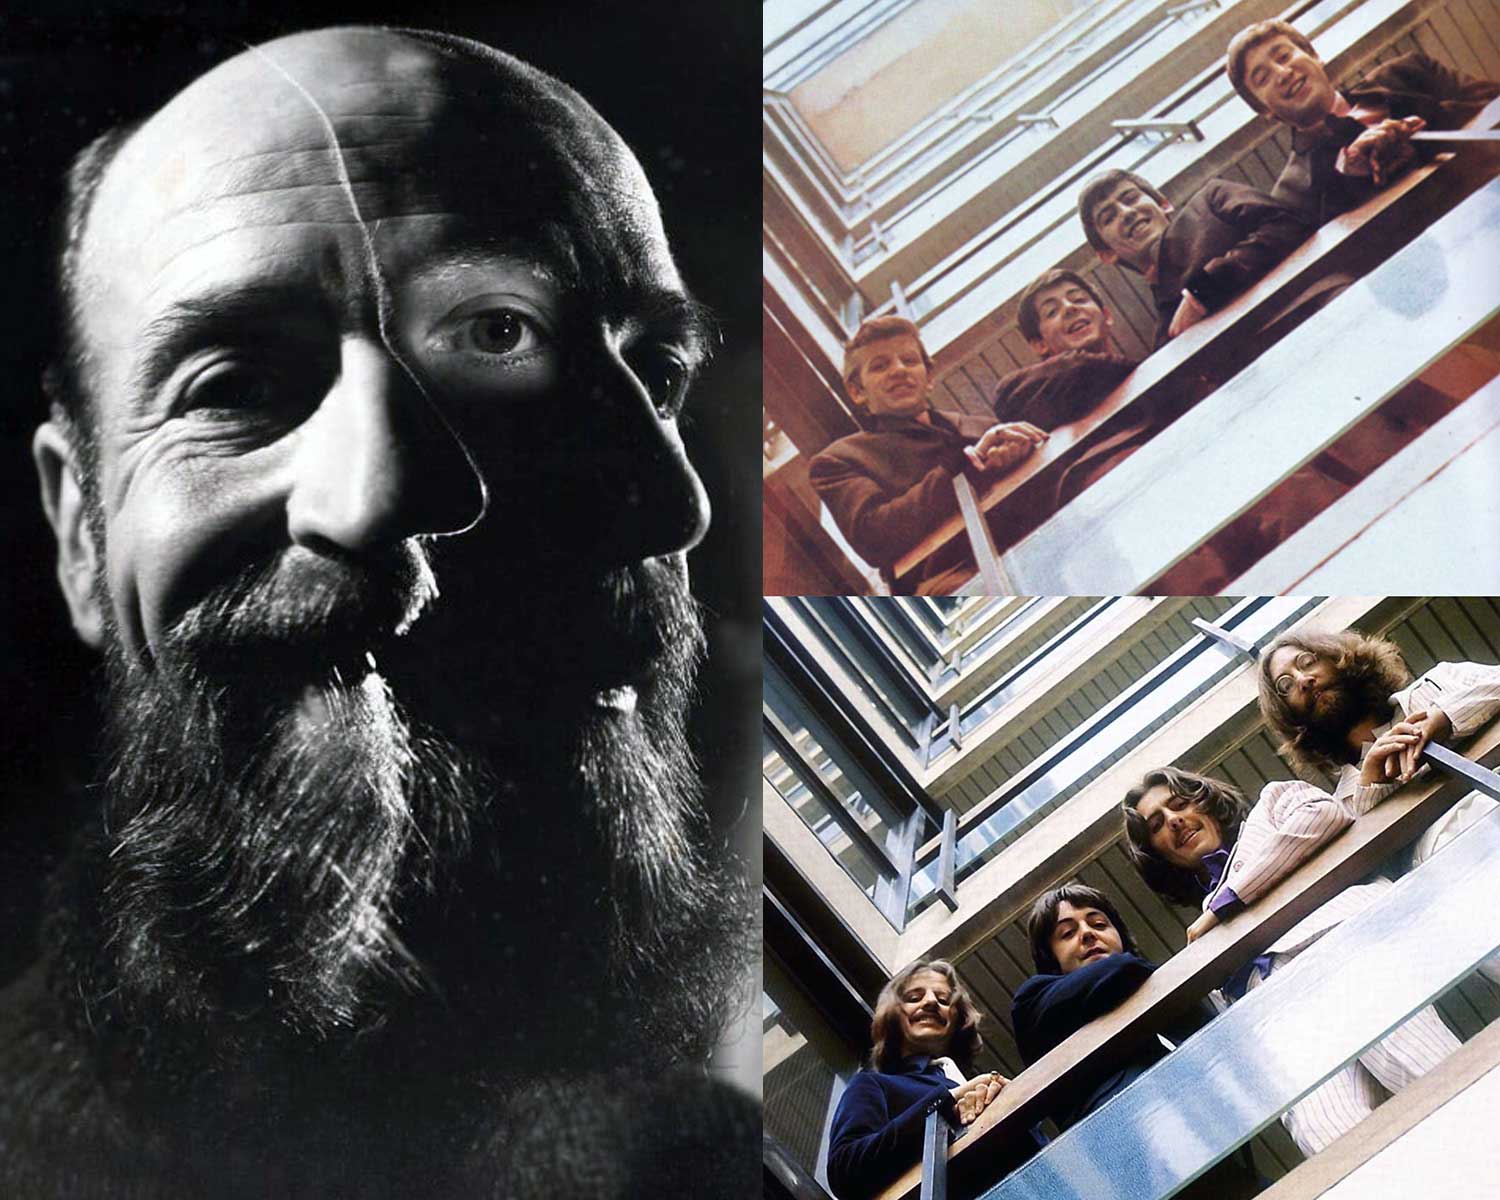 Angus McBean and his famous photos of the Beatles on the EMI staircase